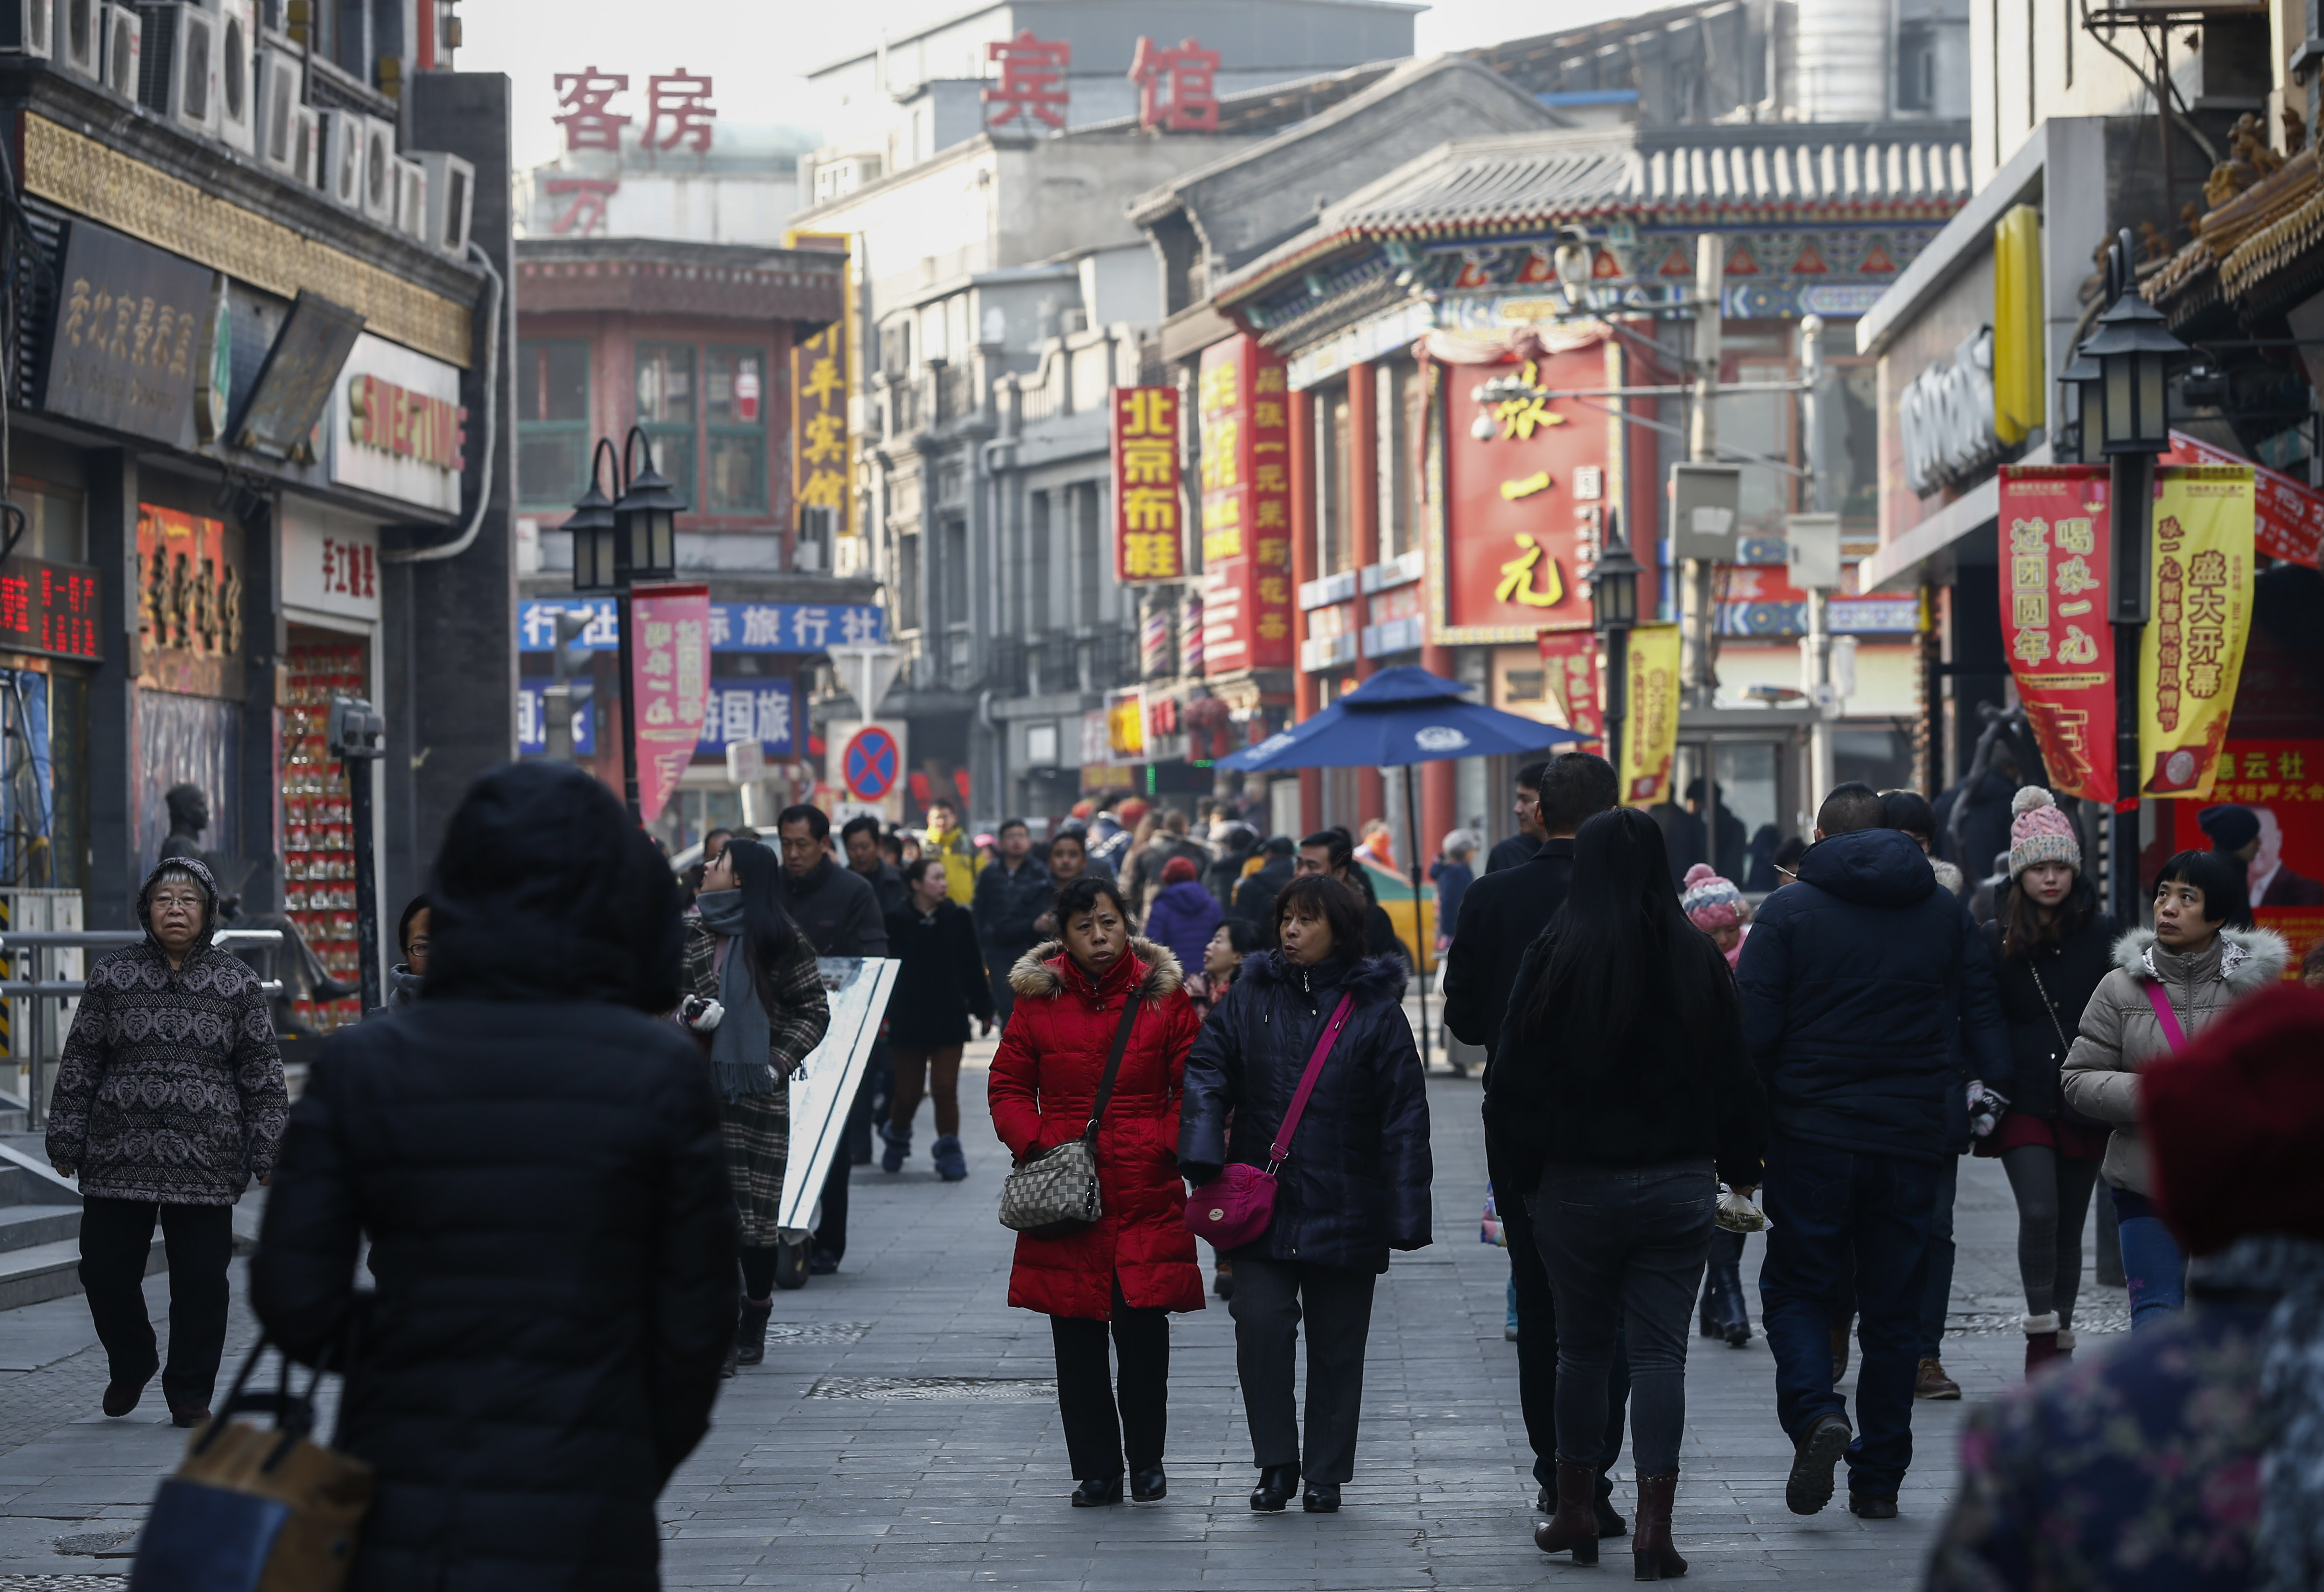 ECONOMIC SLOWDOWN. Citizens walk past commercial establishments at the shopping area of Qianmen district in Beijing, China, January 19, 2016. File photo by Rolex Dela Peña/EPA  